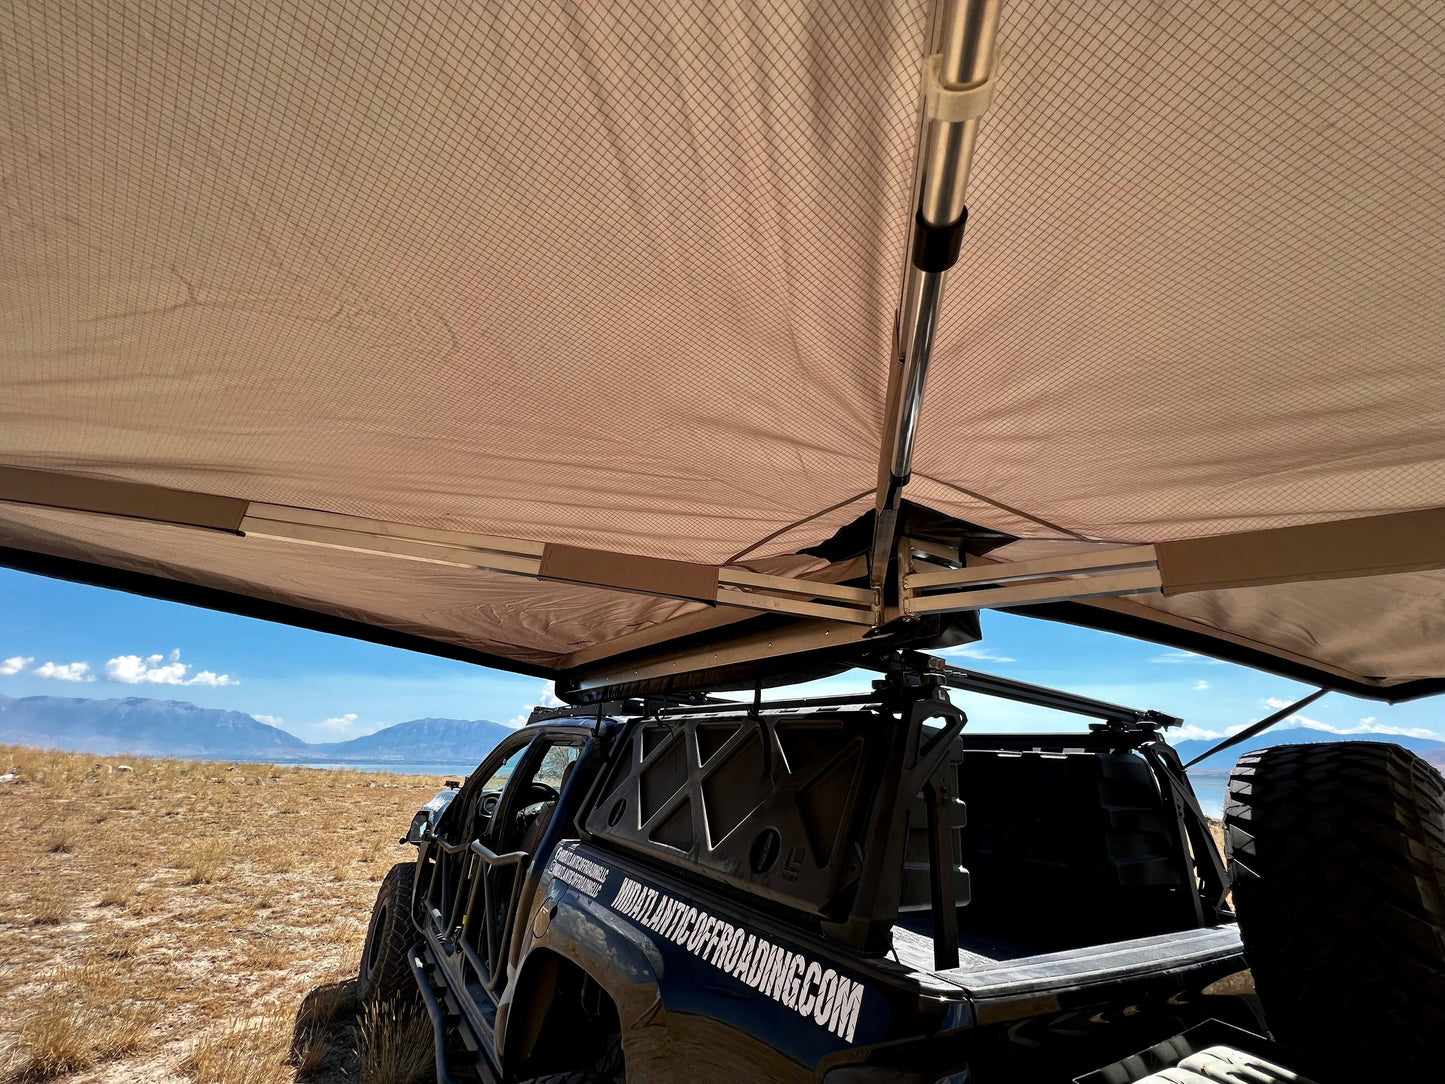 270 Freestanding Batwing Awning by Mid-Atlantic Off-Roading - Mid-Atlantic Off-Roading